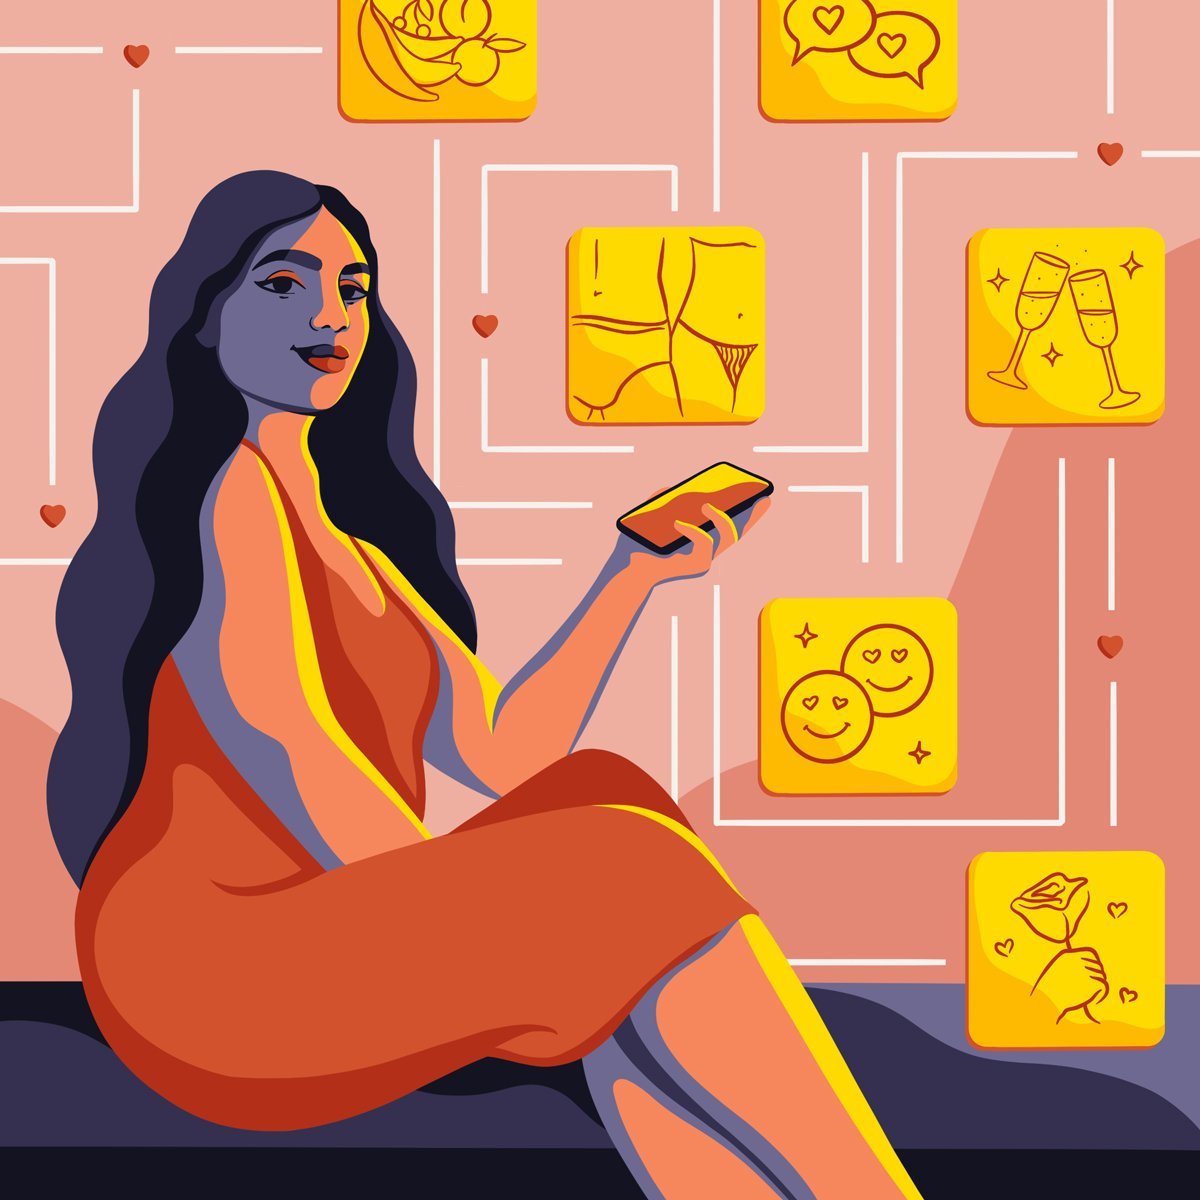 Six Dating Apps That Take Your Pleasure Seriously pic